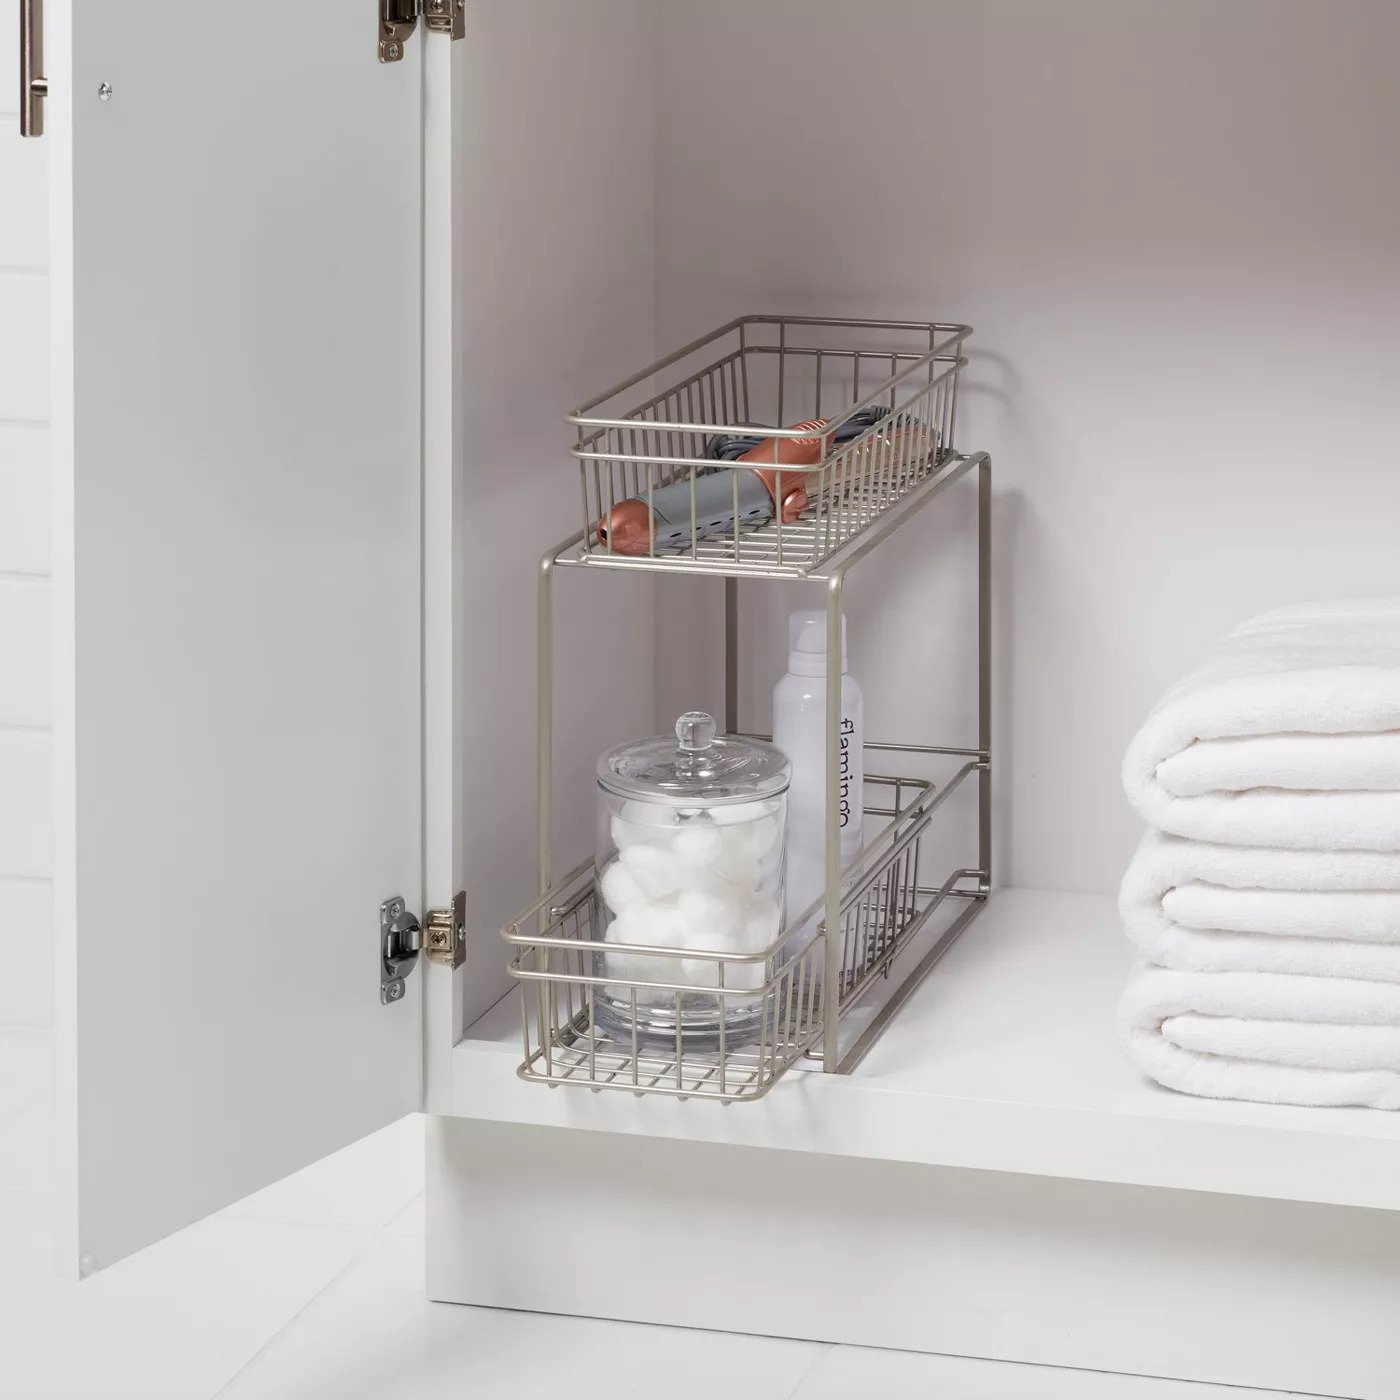 25 Smart Organizers That Will Change Your Messy Bathroom Forever — All  Under $25